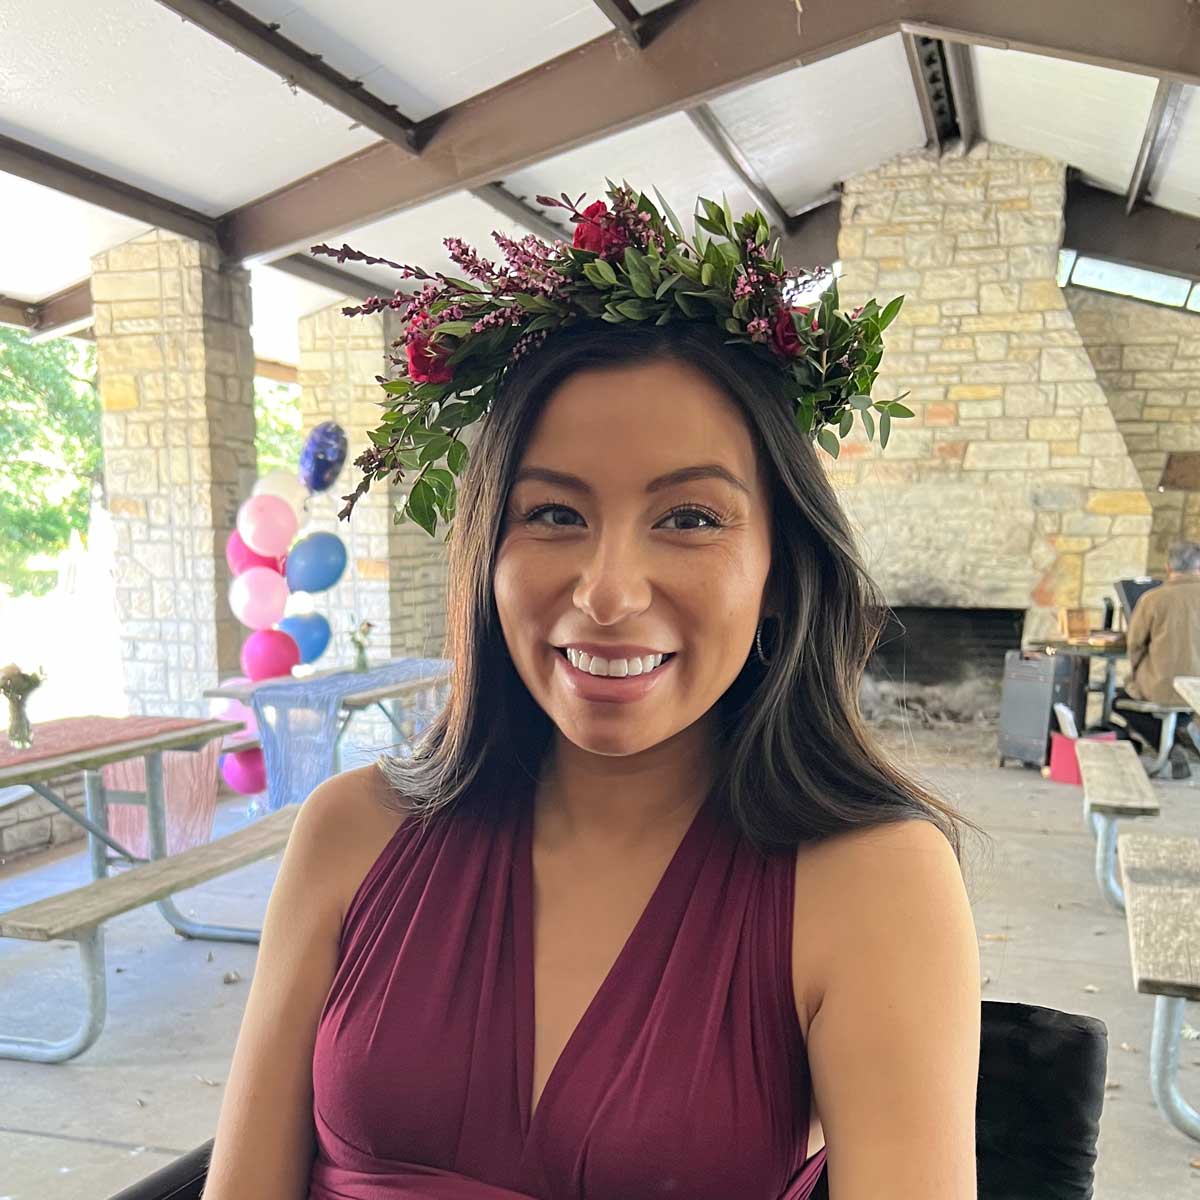 A smiling woman wearing a floral headpiece and a burgundy dress at an outdoor event with balloons in the background.